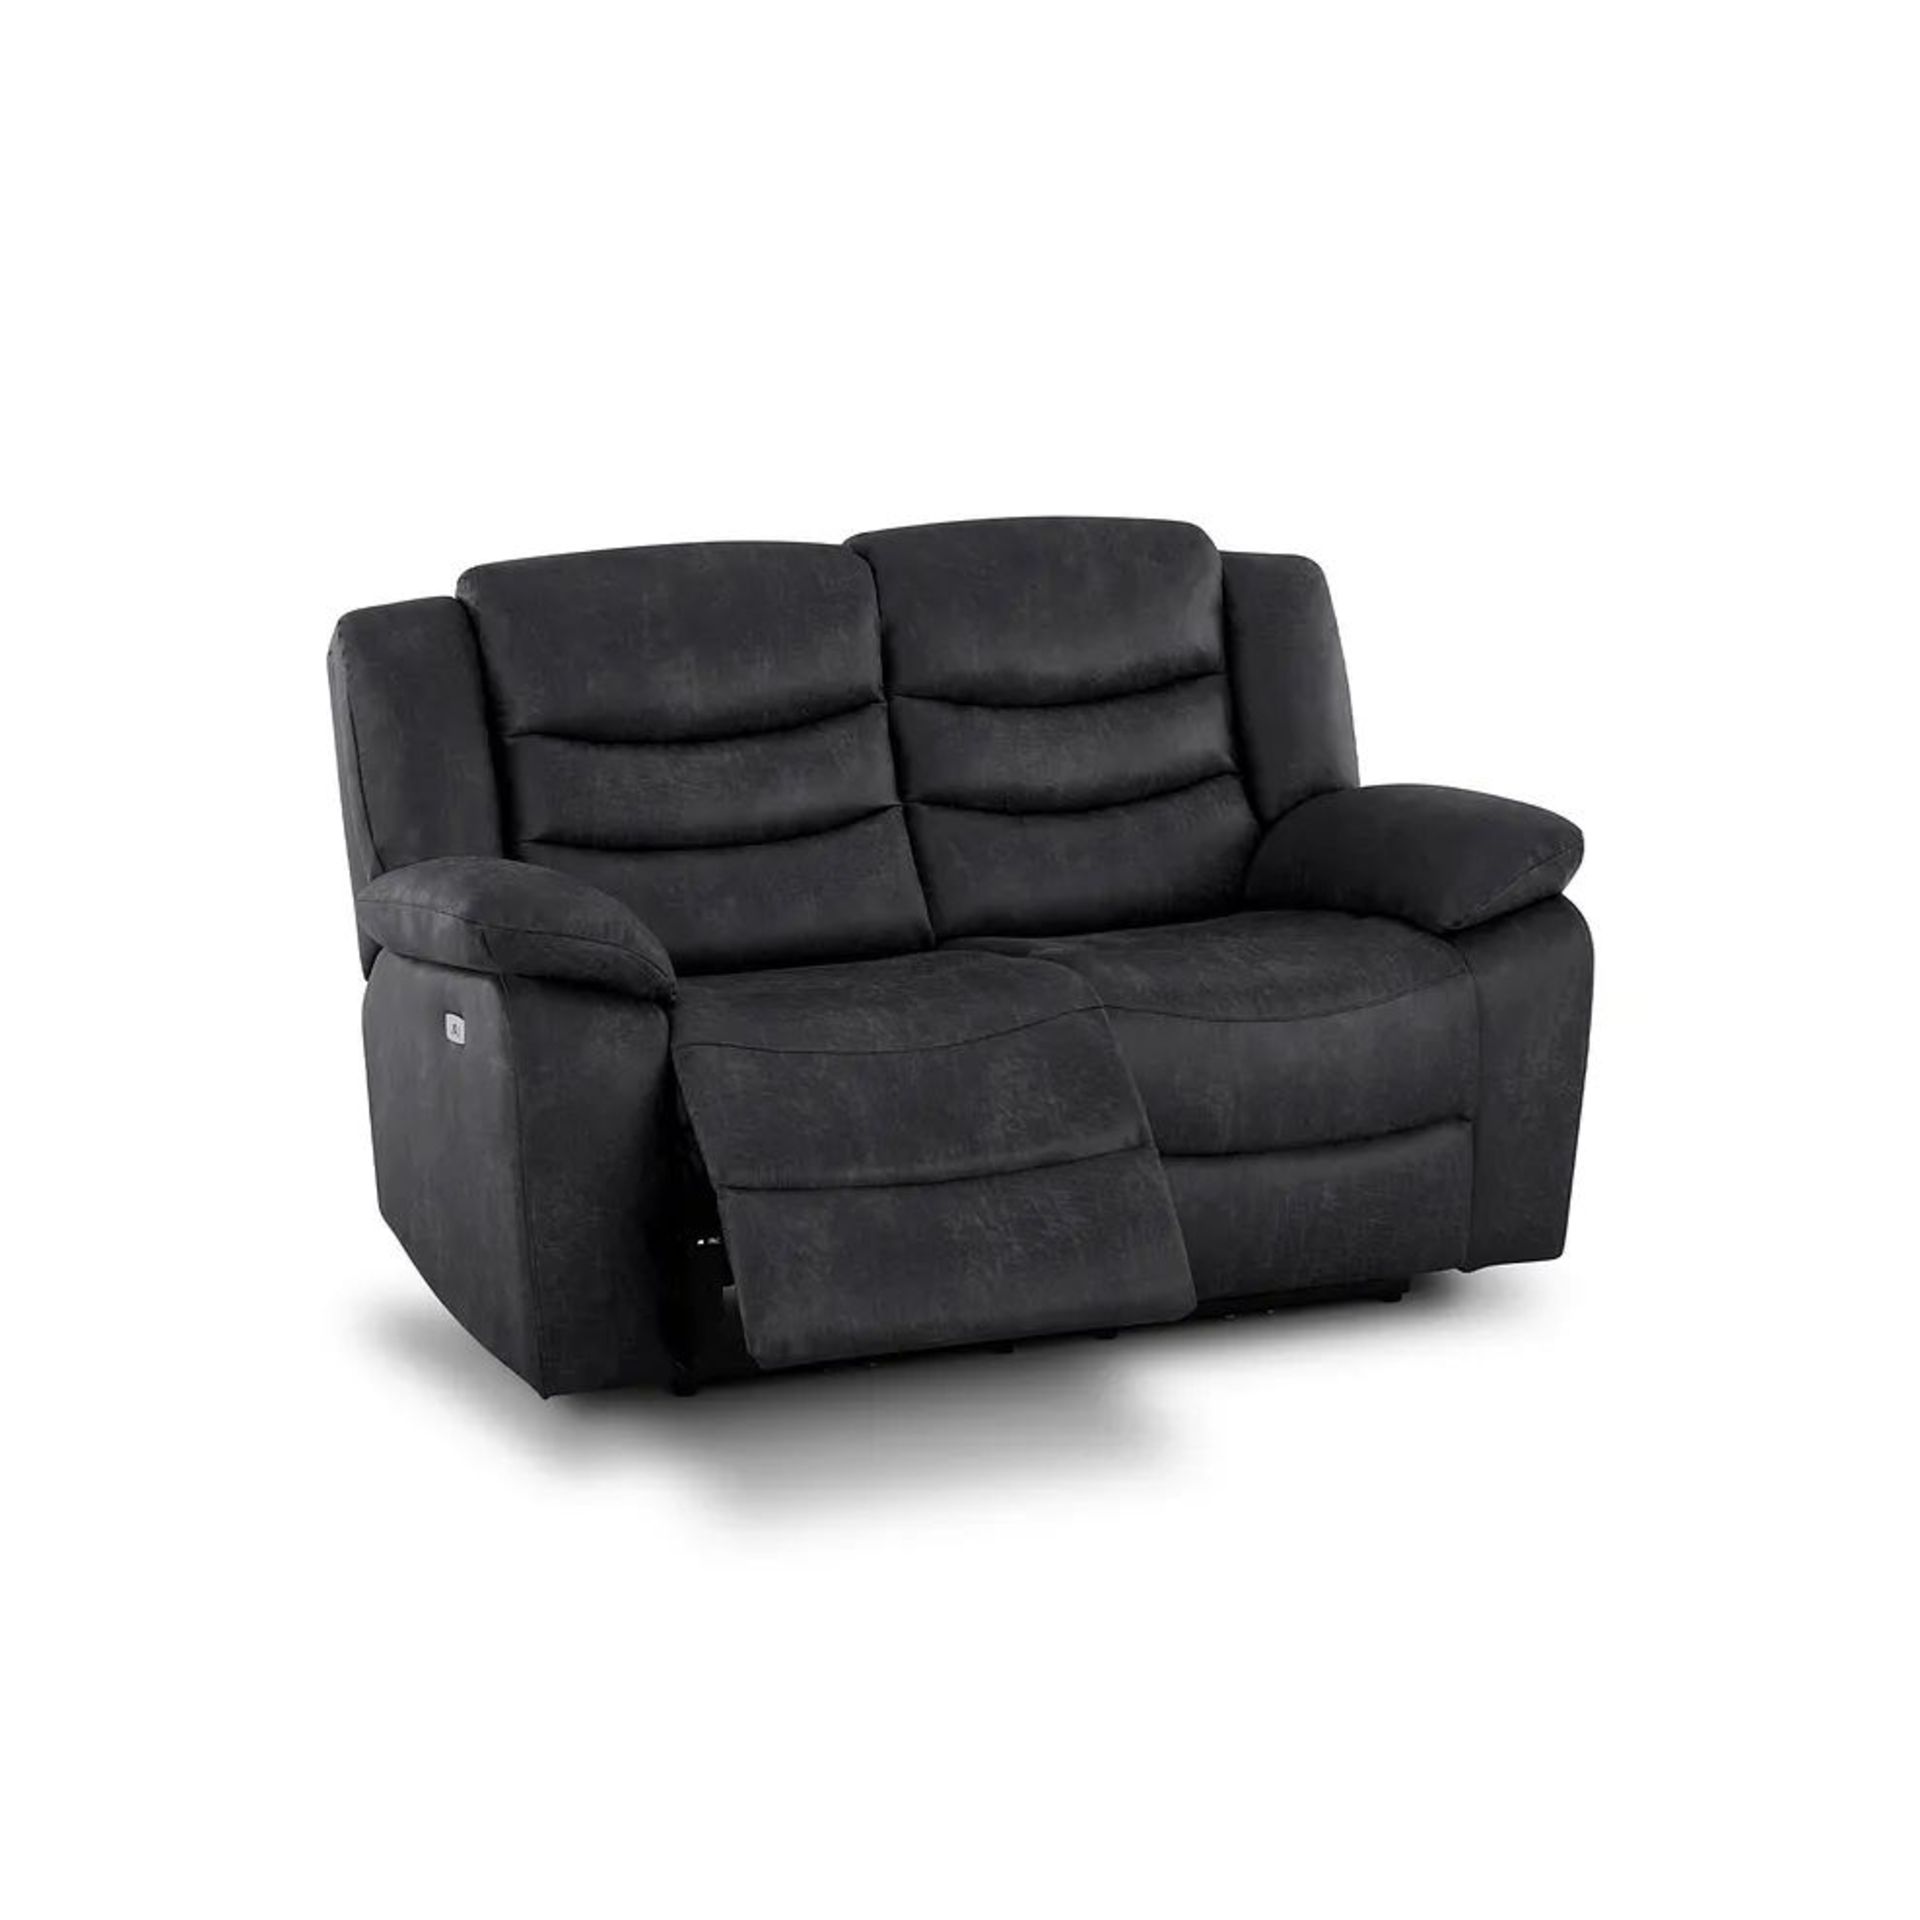 BRAND NEW MARLOW 2 Seater Electric Recliner Sofa - MILLER GREY FABRIC. RRP £1049. Designed to suit - Image 3 of 12